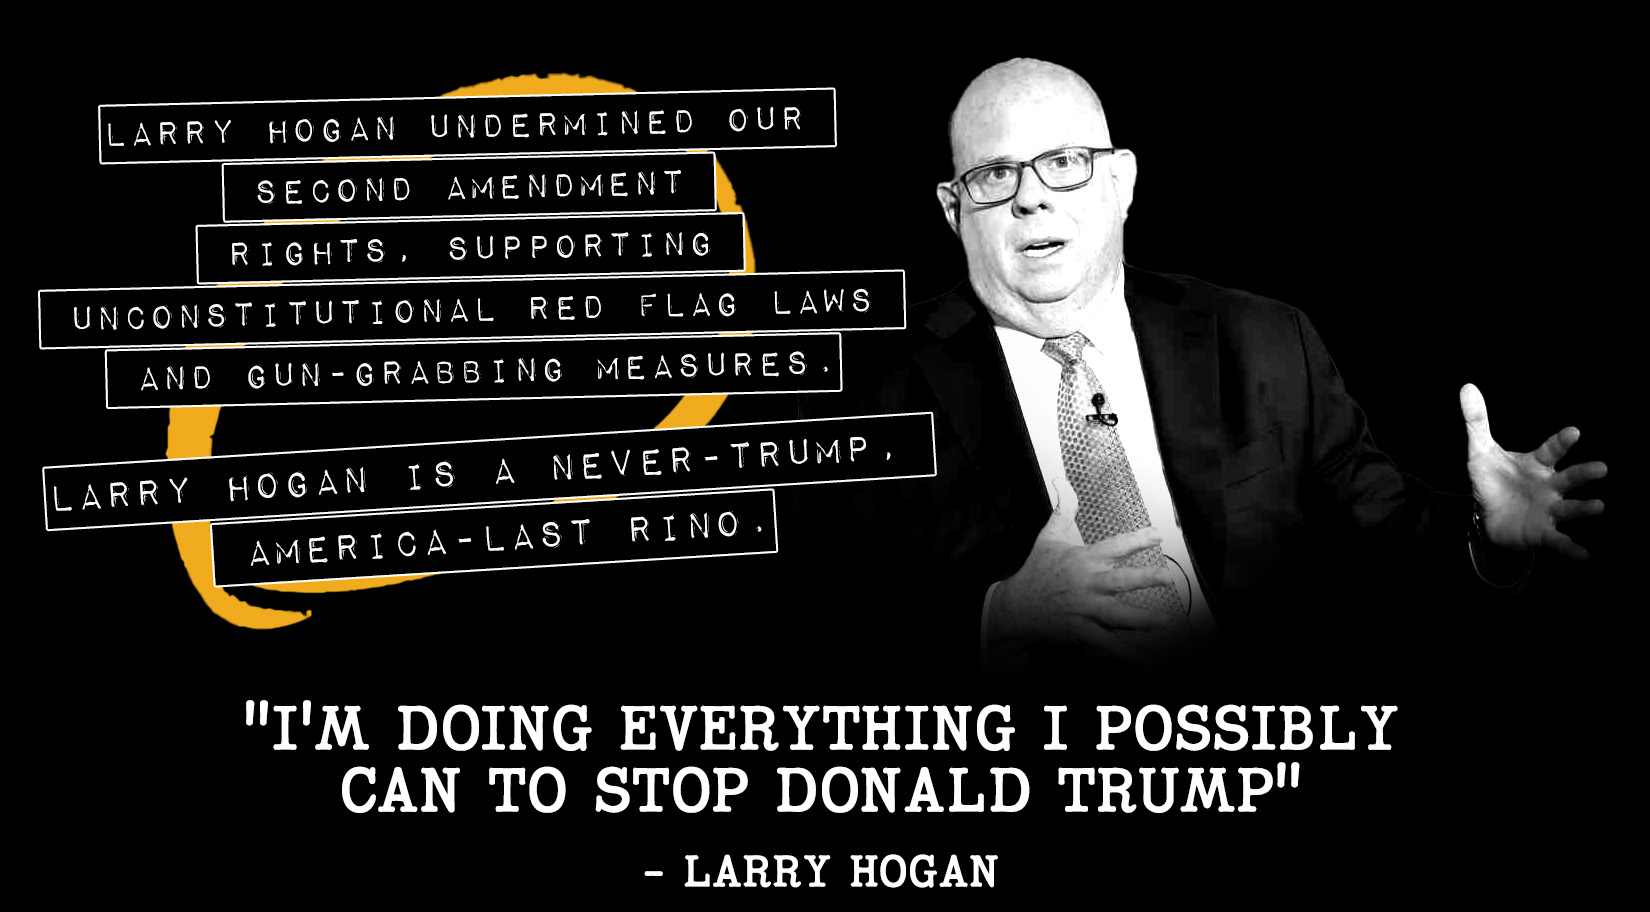 Larry Hogan undermined our Second Amendment rights, supporting unconstitutional red flag laws and gun-grabbing measures.